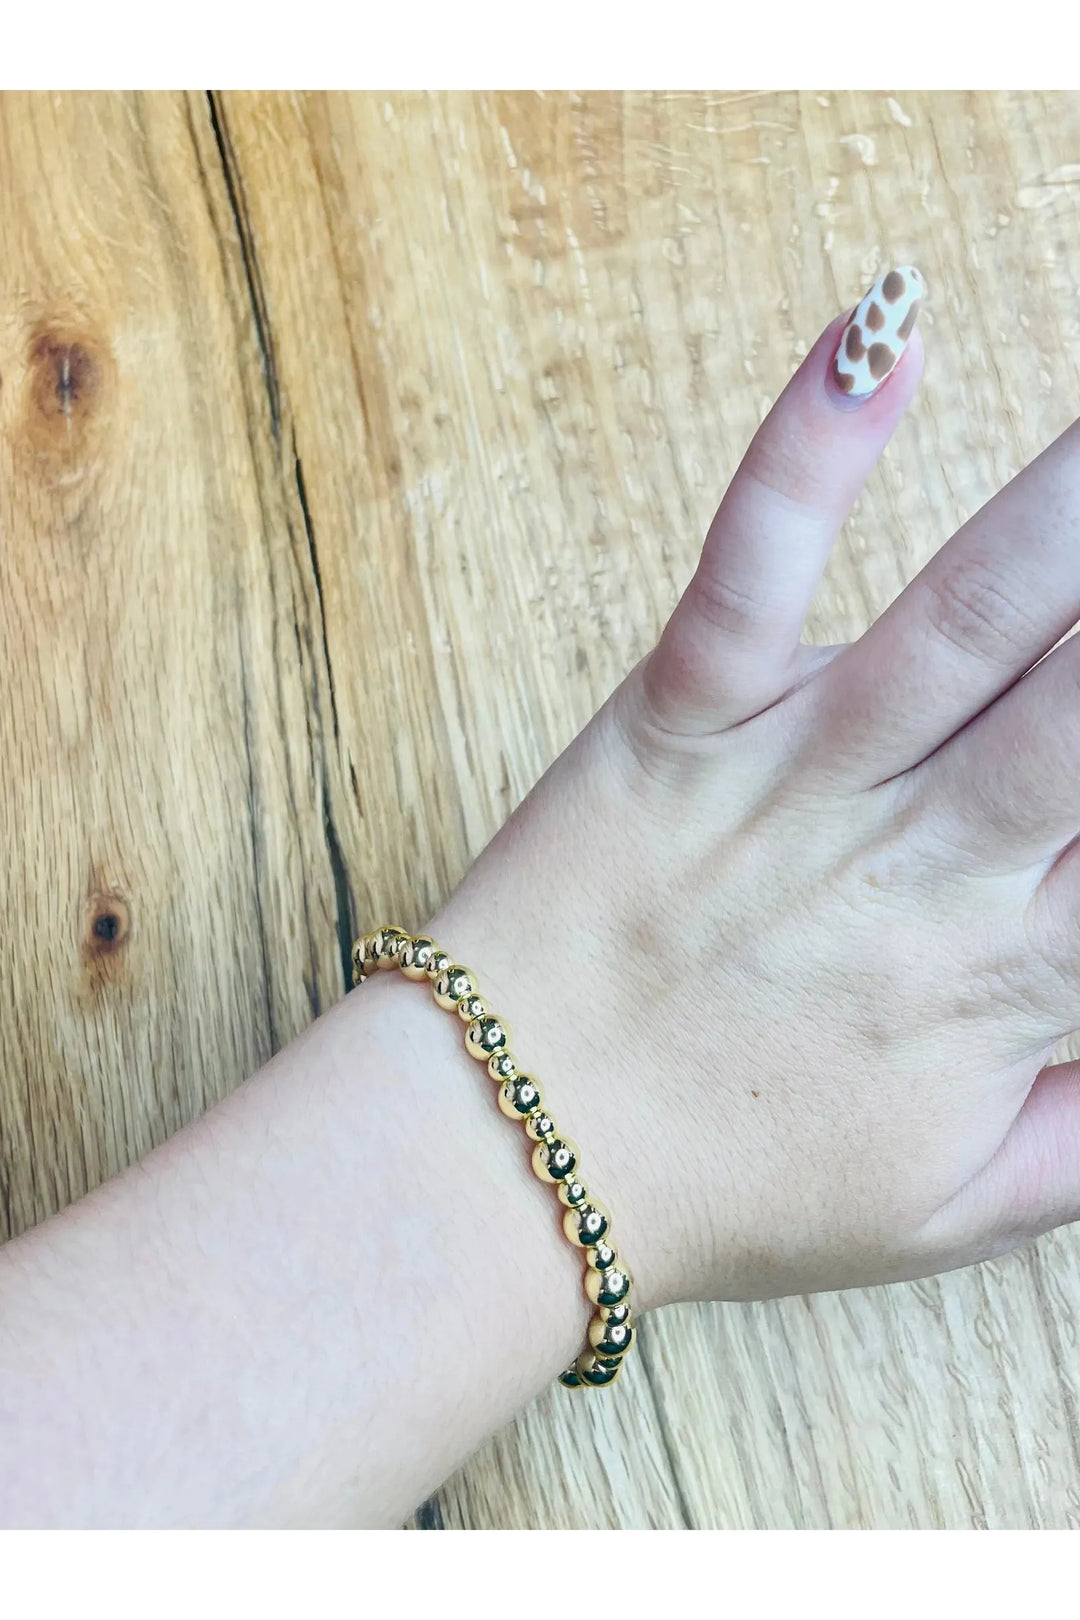 Gold Stretch Bead  Bracelet with 5mm & 3mm Beads - Vintage Dragonfly Boutique